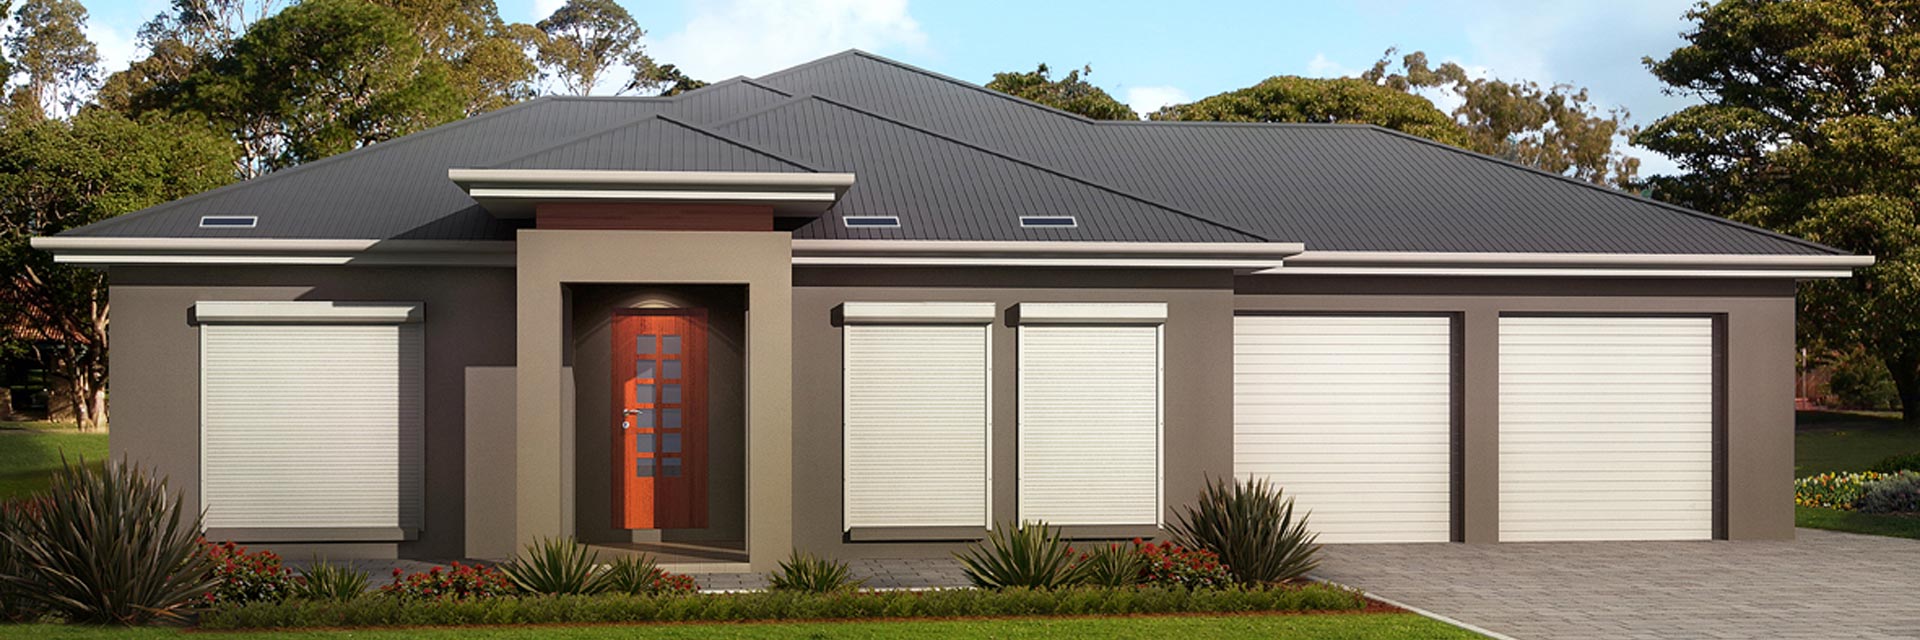 <h1>SolarSmart Roller Shutter</h1><p>SolarSmartTM has been developed by CW Products and is the most advanced technology in solar powered roller shutter automation in Australia.</p><a  data-cke-saved-href='roller-shutters.html' href='roller-shutters.html'>Learn More</a>